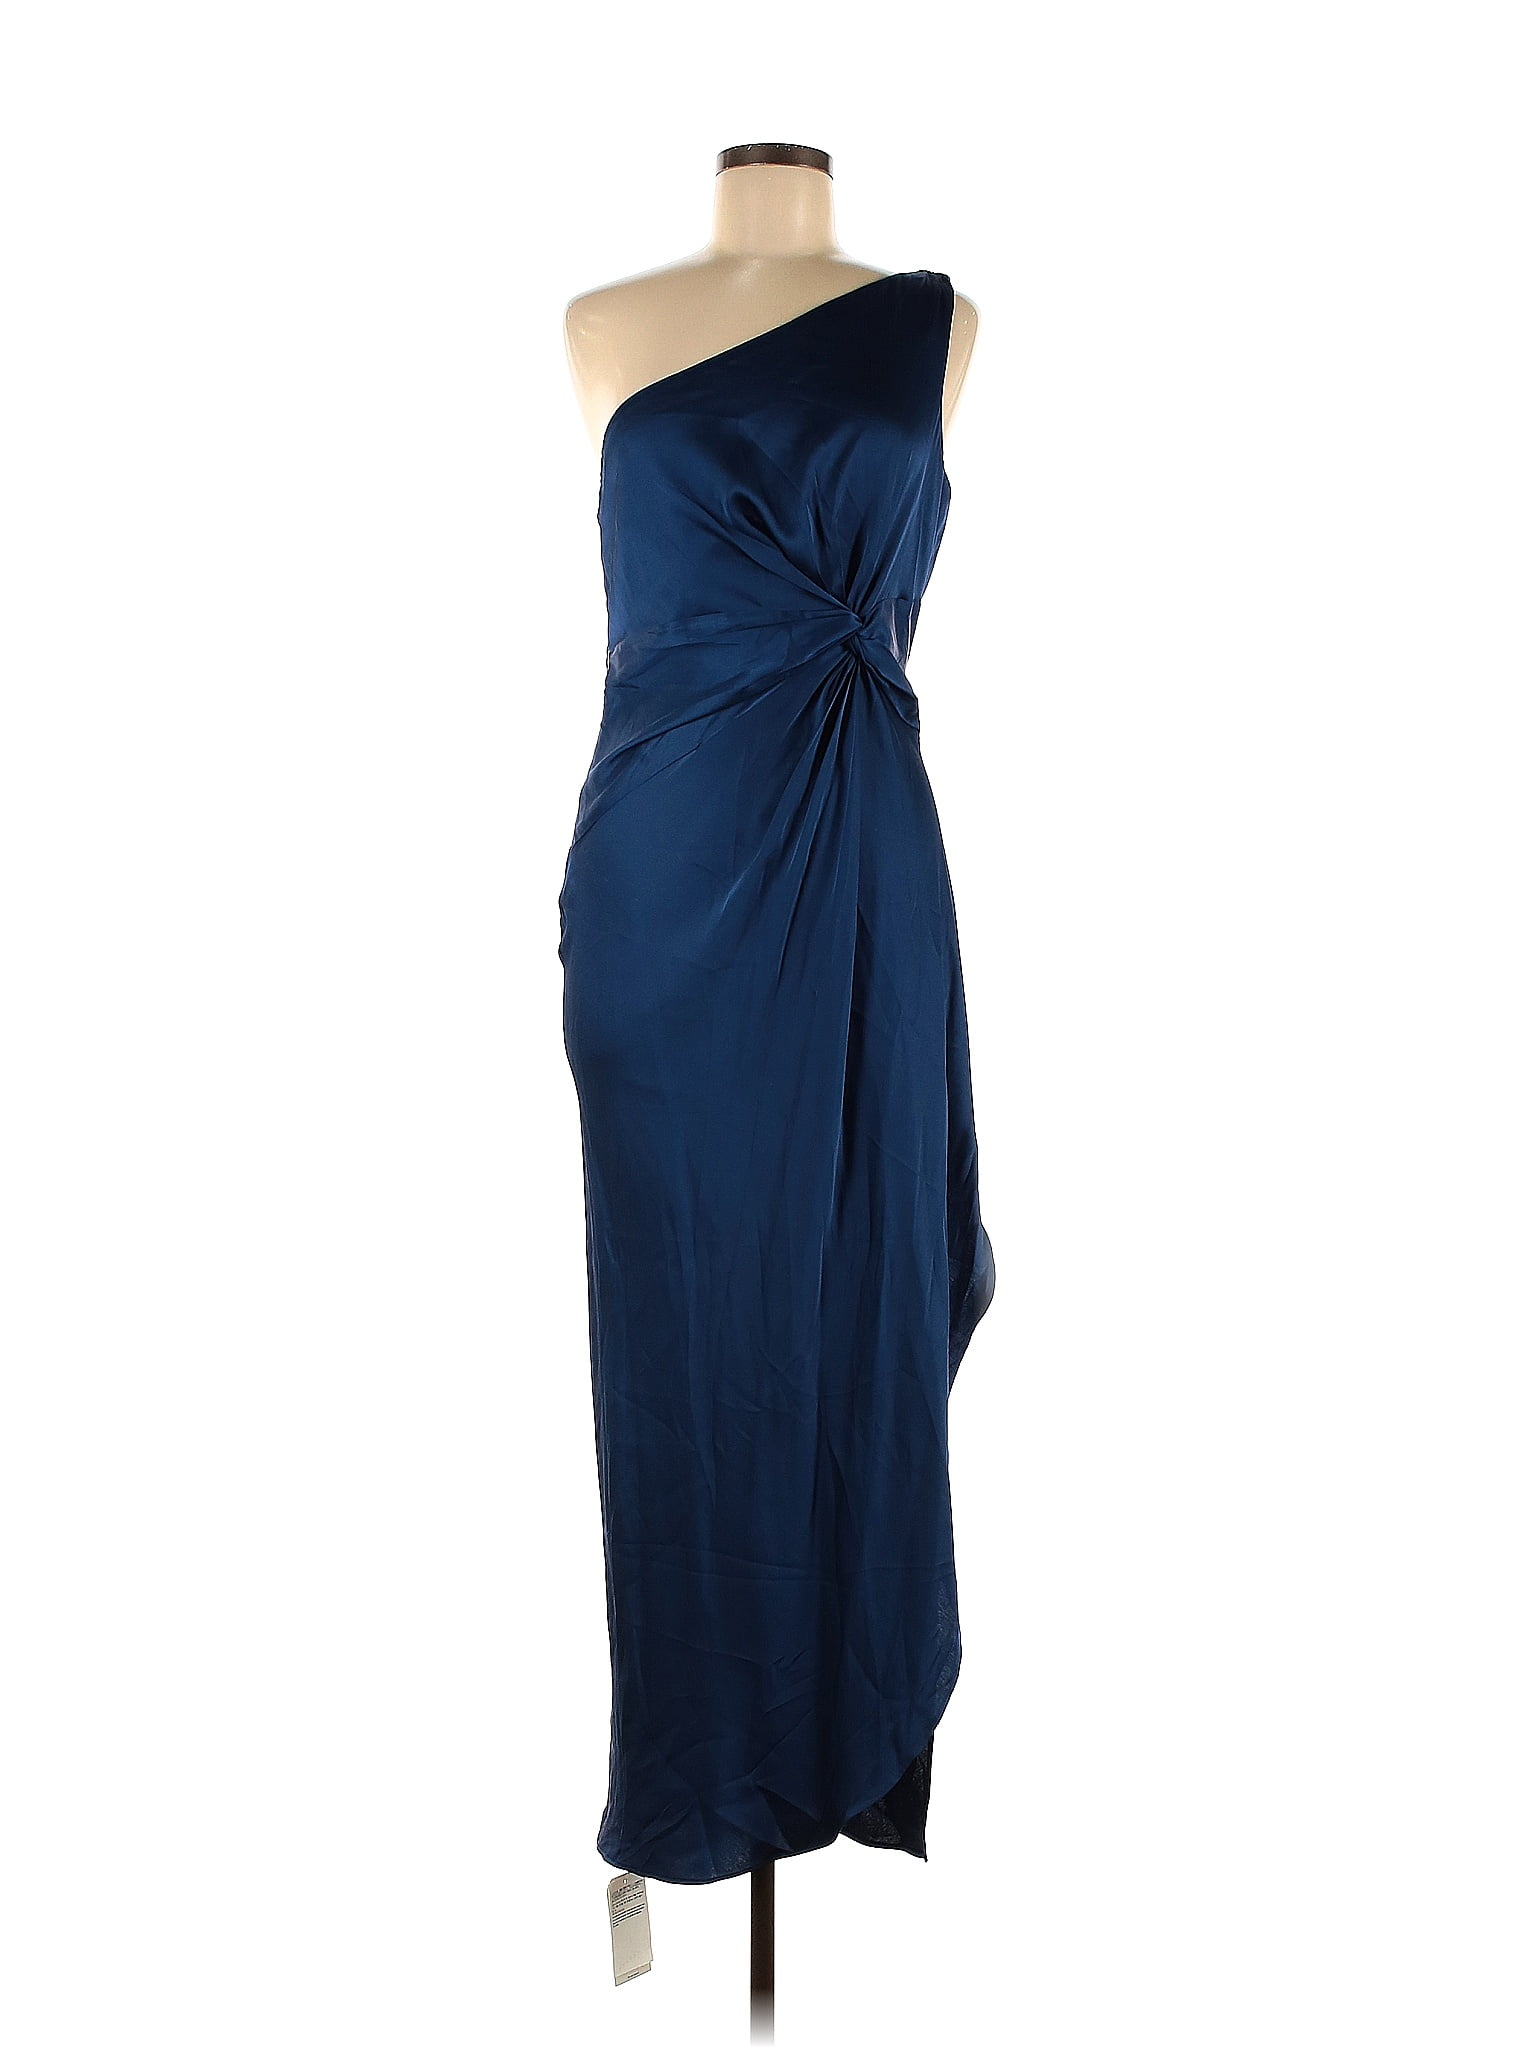 Abercrombie & Fitch Solid Navy Blue Cocktail Dress Size M - 20% off ...